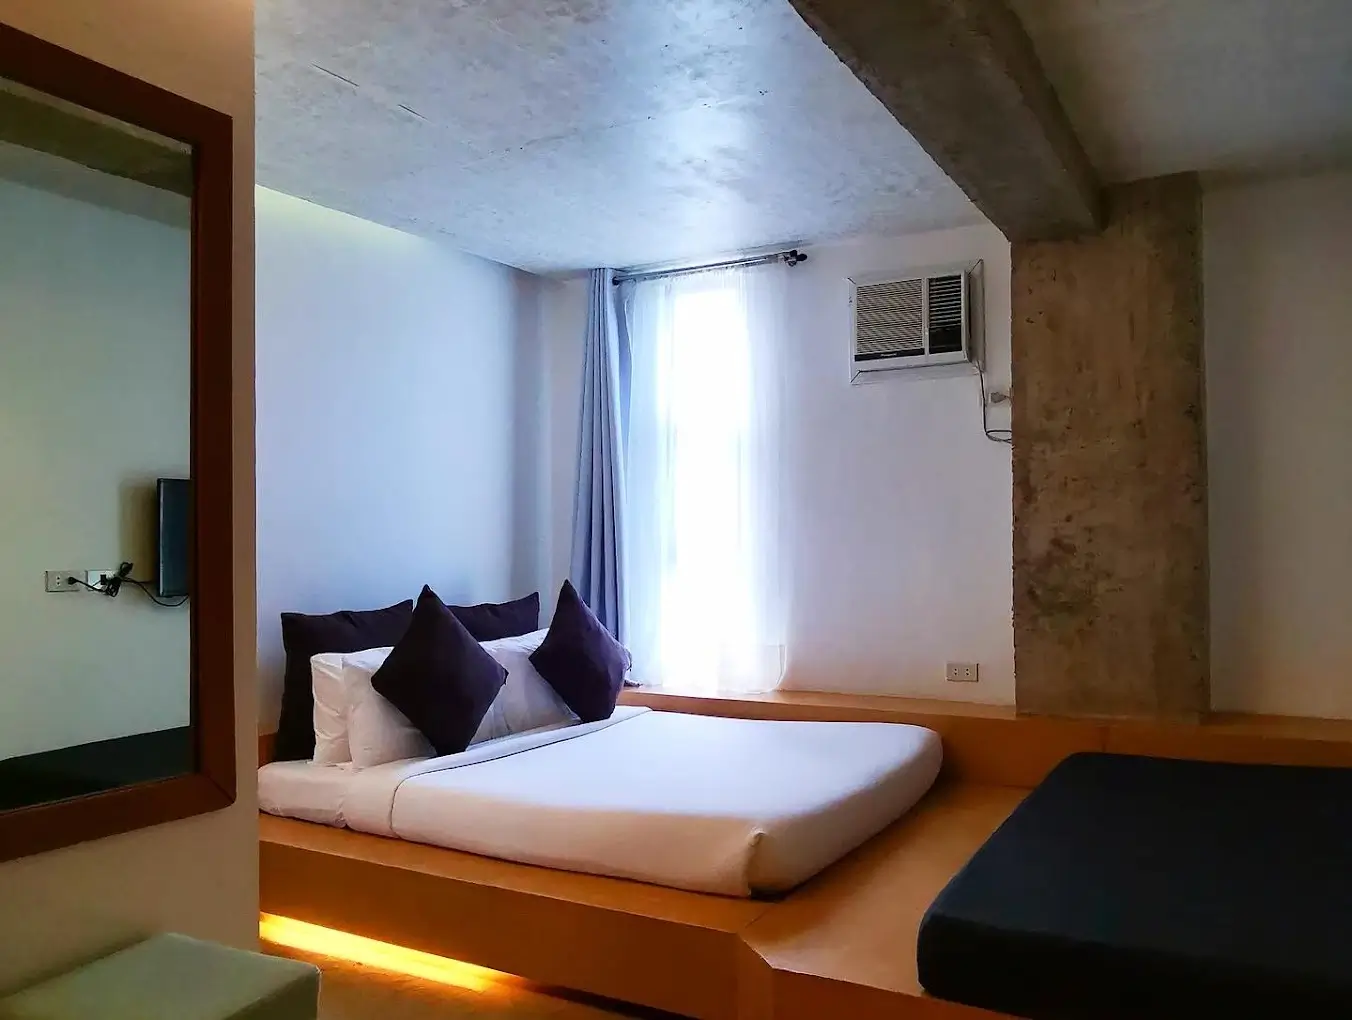 pacious room at Urban Boutique Hotel, Boracay, with a queen-sized bed set on a lighted platform, concrete walls, a large mirror, and a cushioned bench, illuminated by natural light from the window.